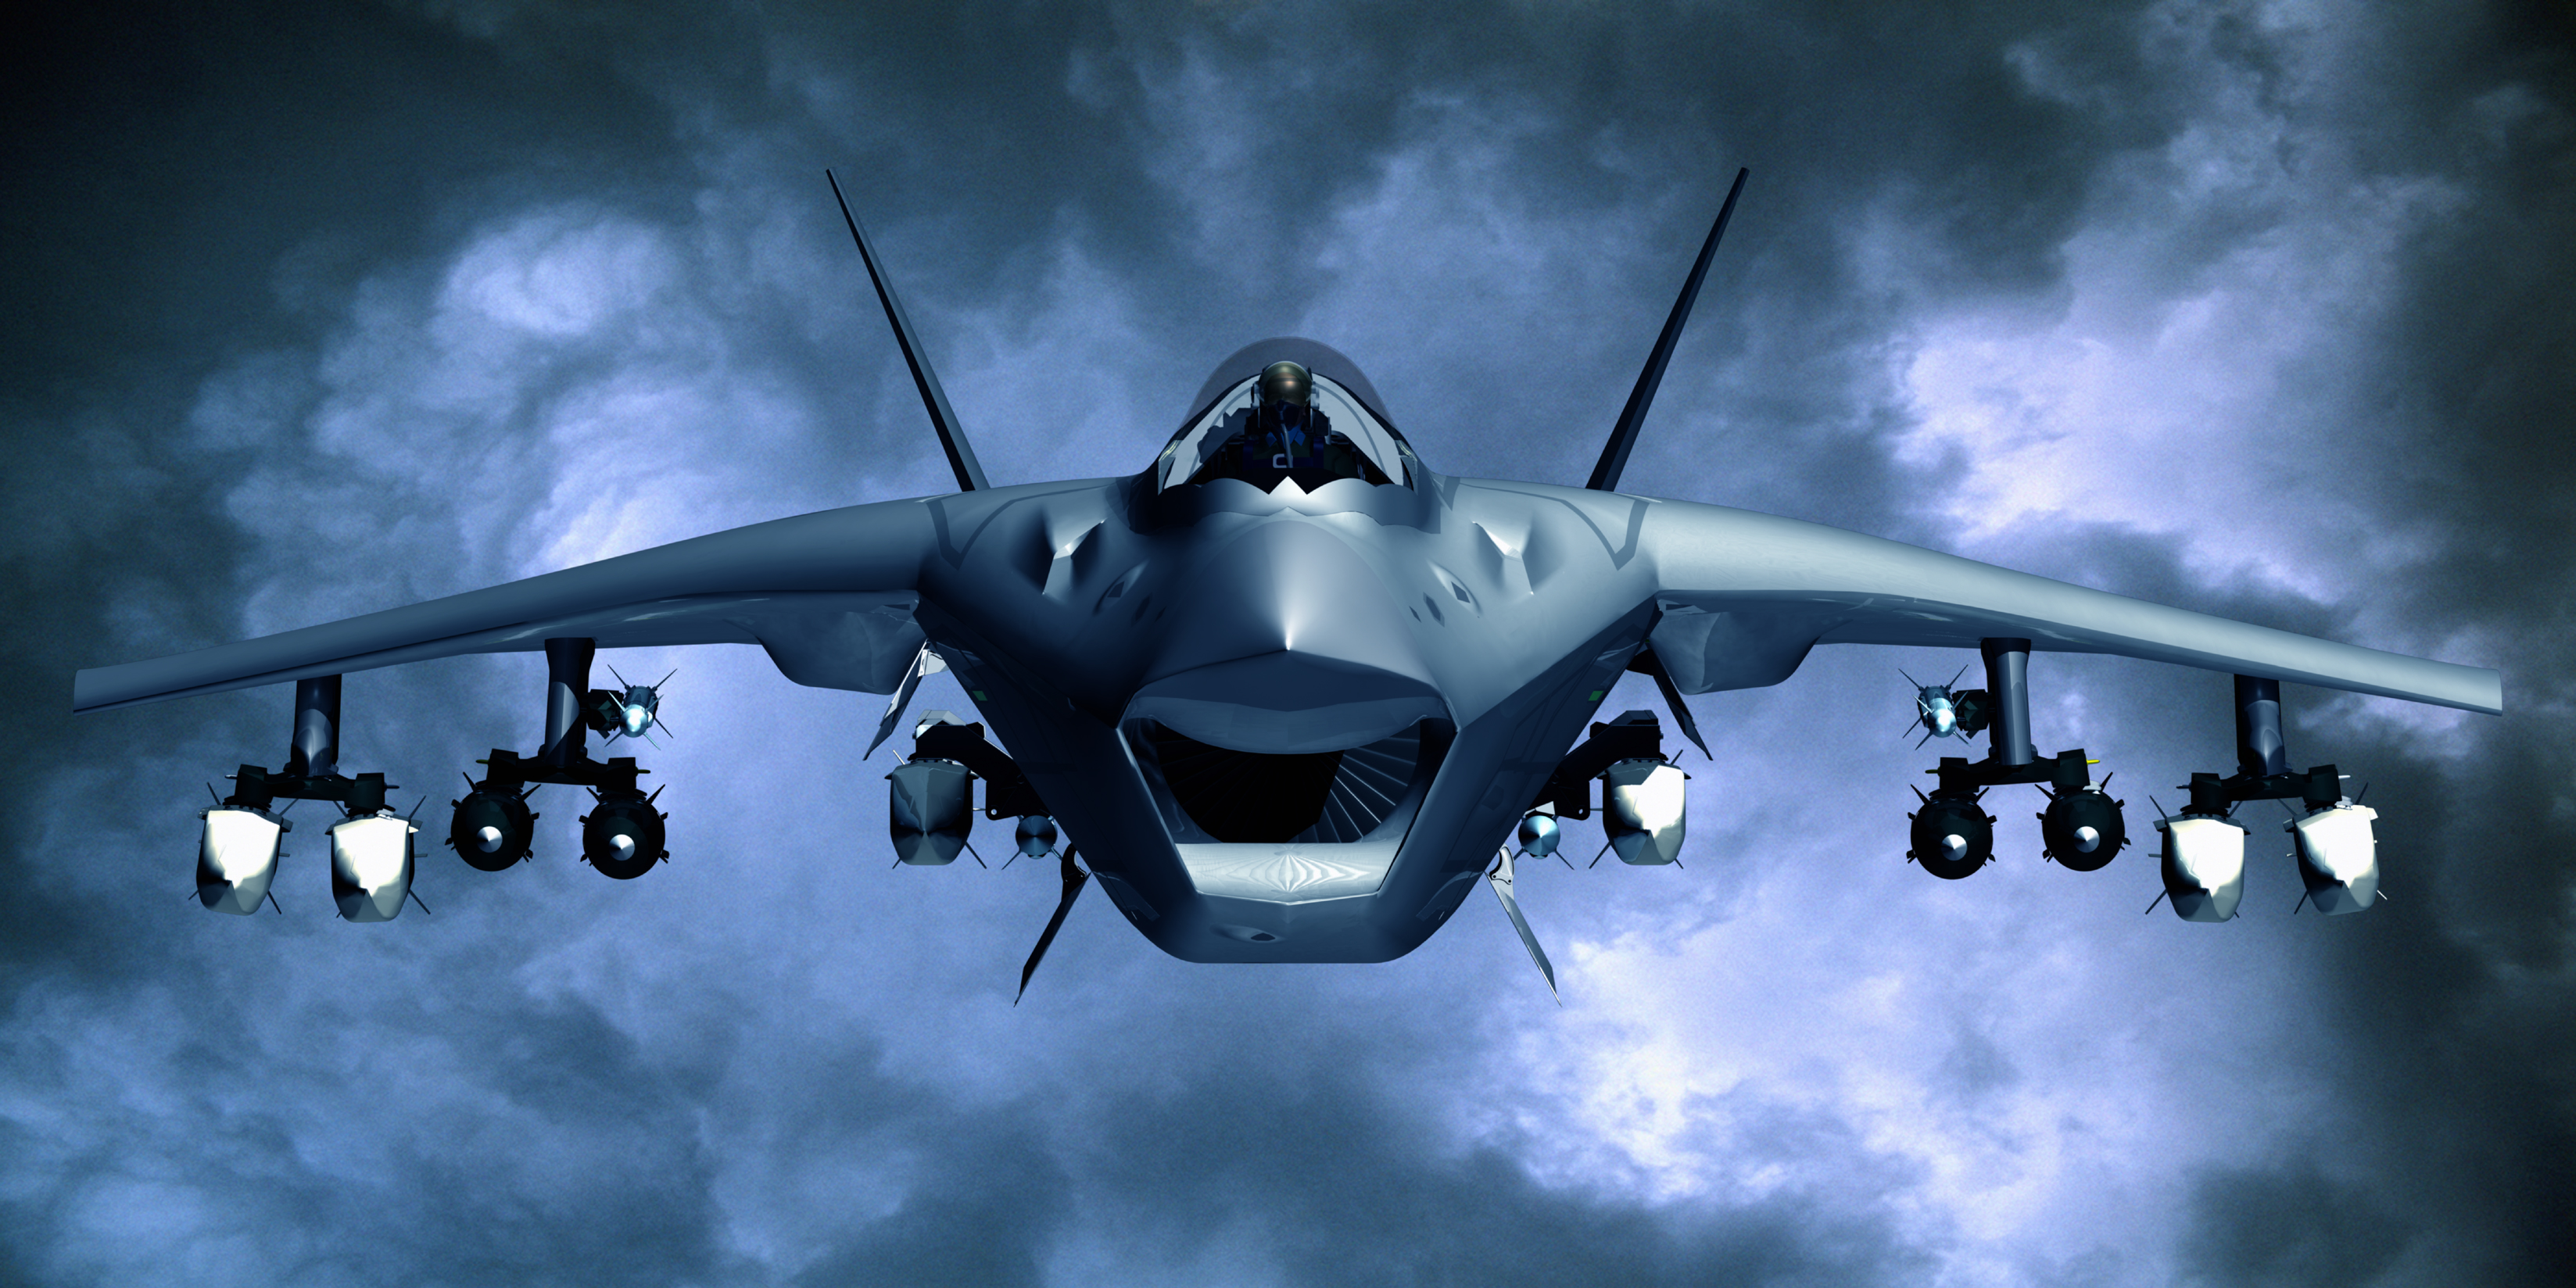 Joint Strike Fighter F-35B from Lockheed Martin